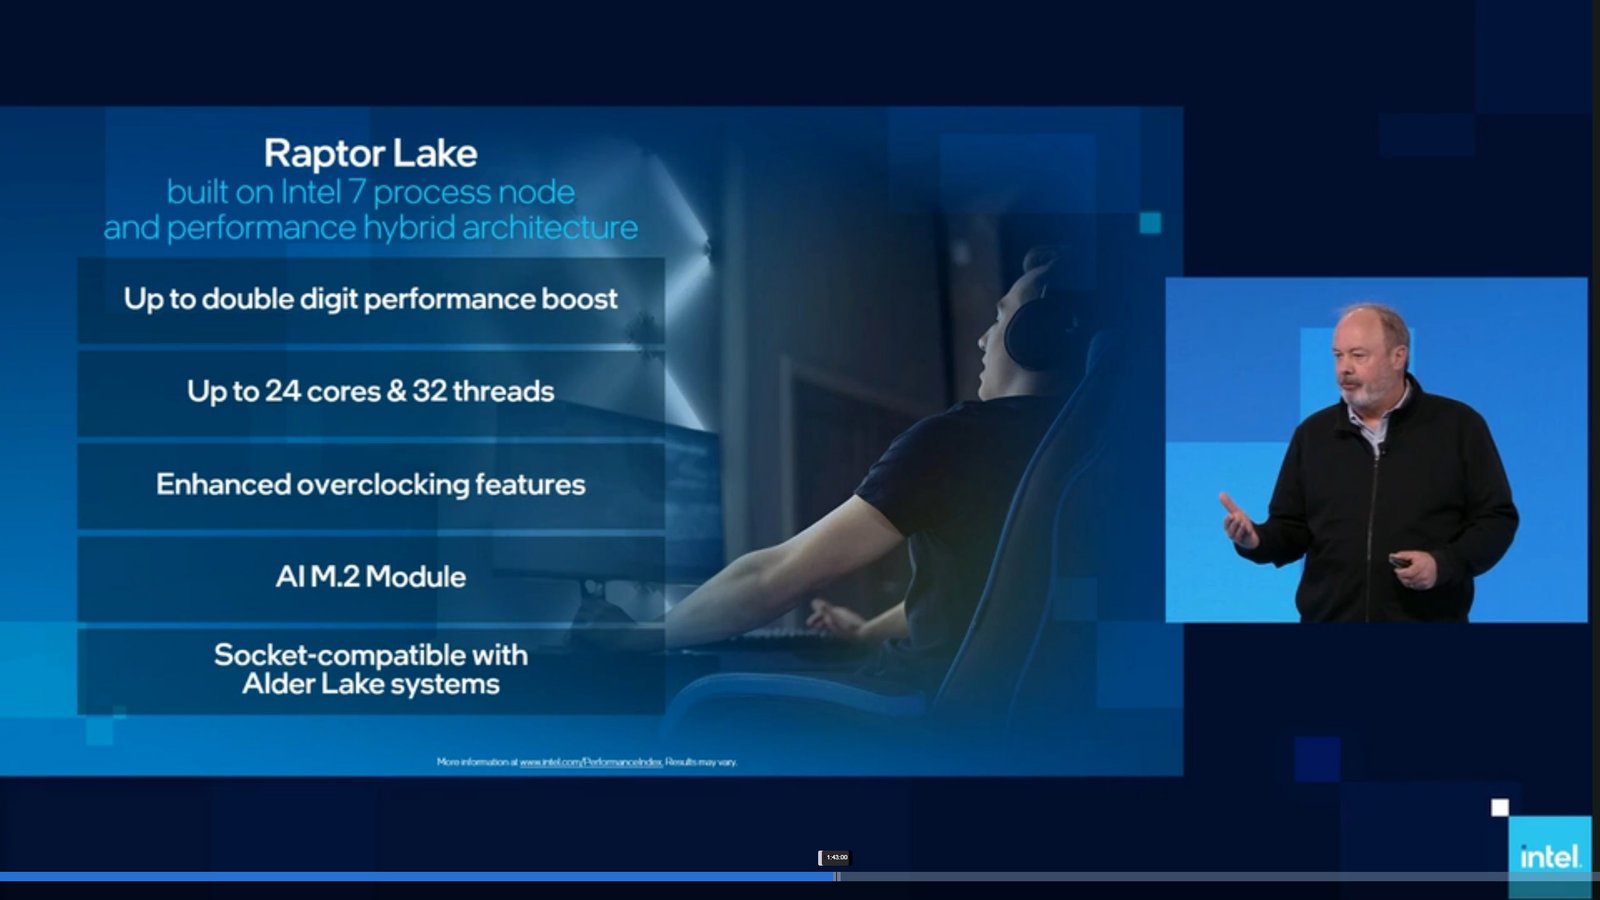 Intel's overview of its 13th Gen Raptor Lak CPU architecture